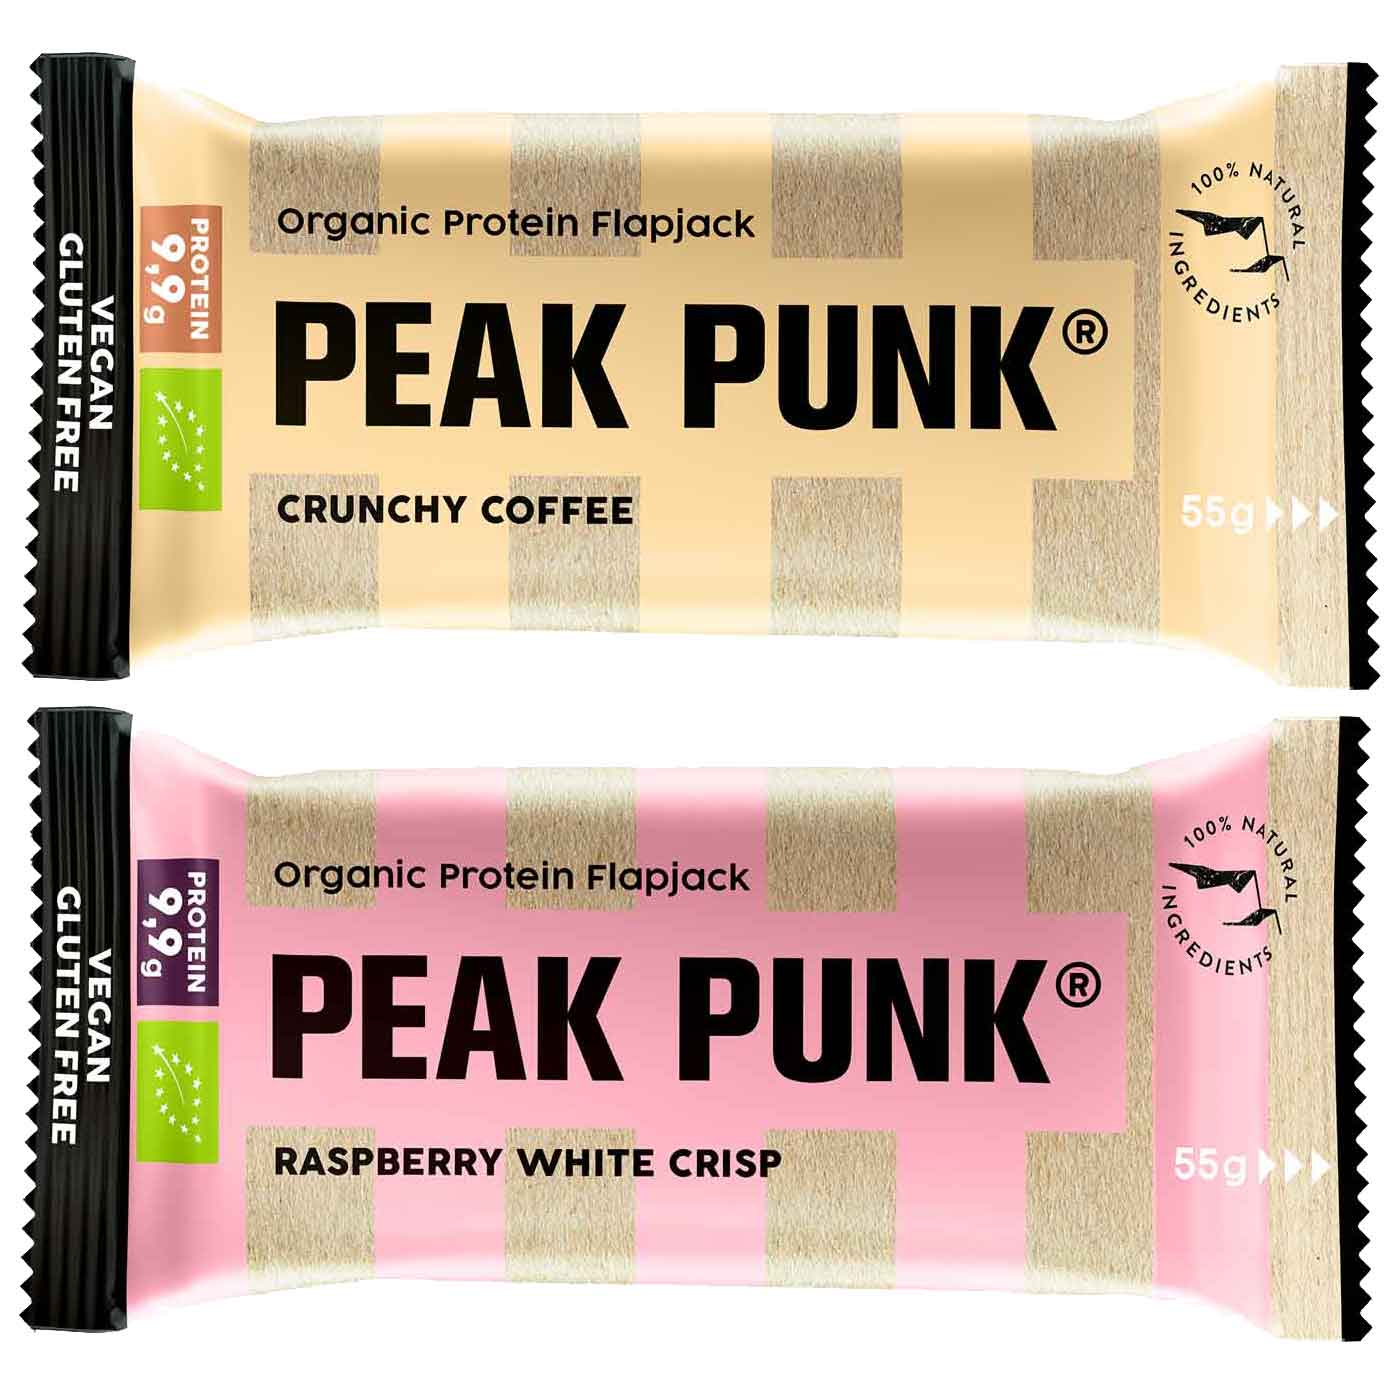 Picture of Peak Punk ORGANIC Protein Flapjack Bar - 55g